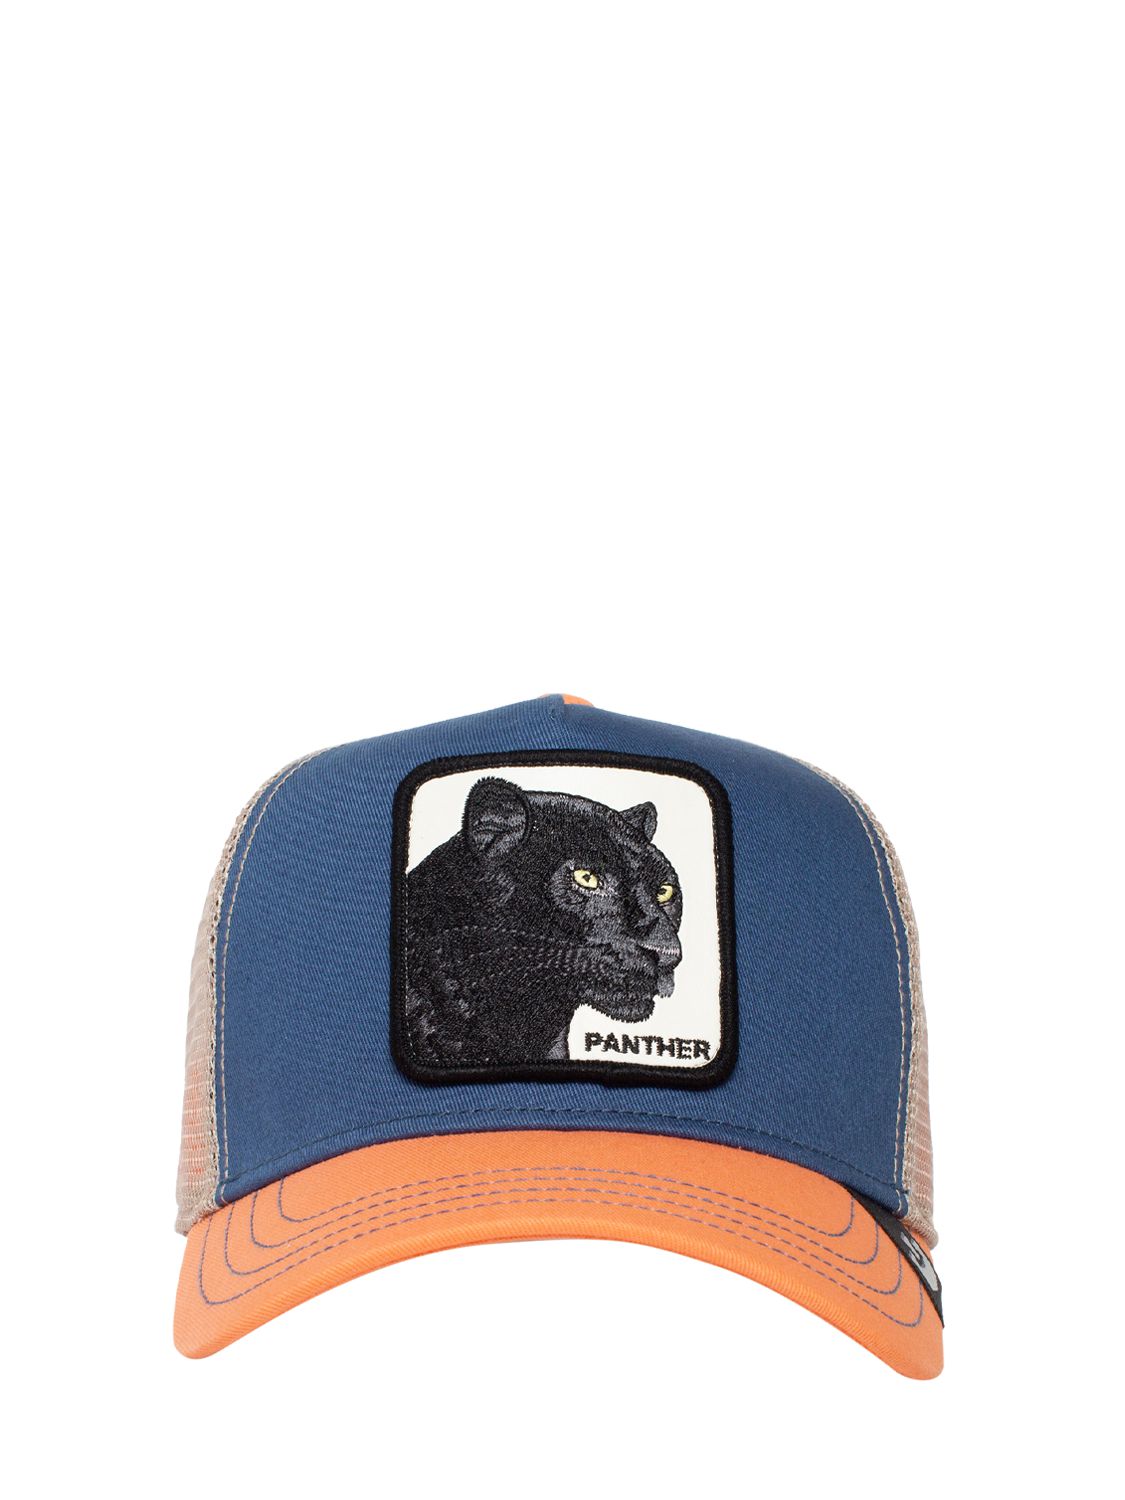 Panther Trucker Hat W/ Patch